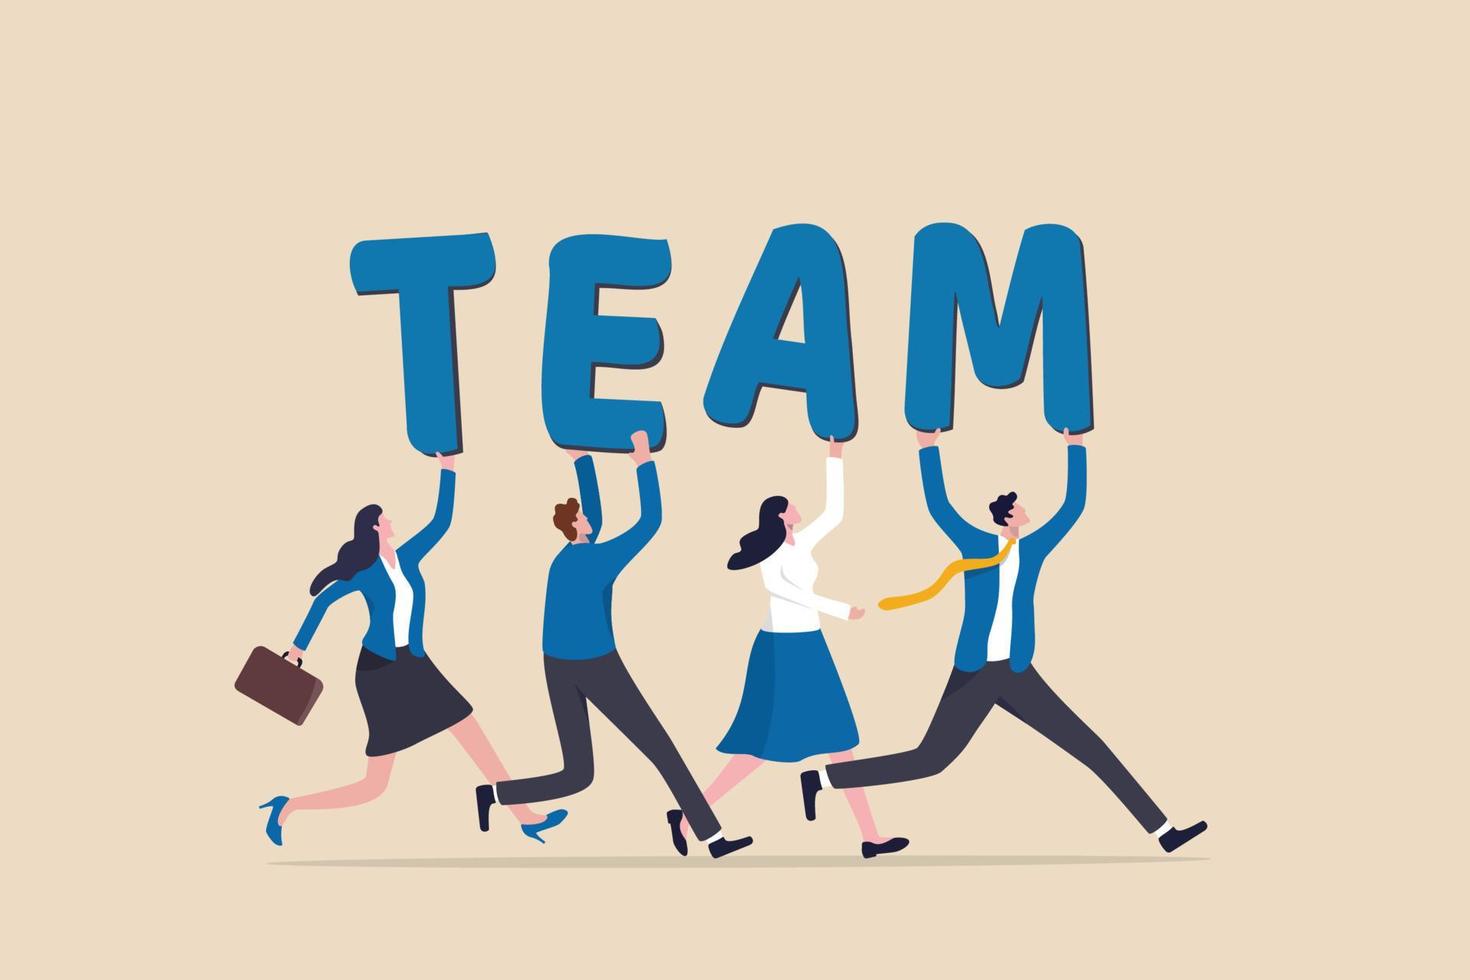 Team working together to win business success, teamwork, cooperation or collaboration, coworker partnership or office colleagues concept, business team people walking together holding the word TEAM. vector